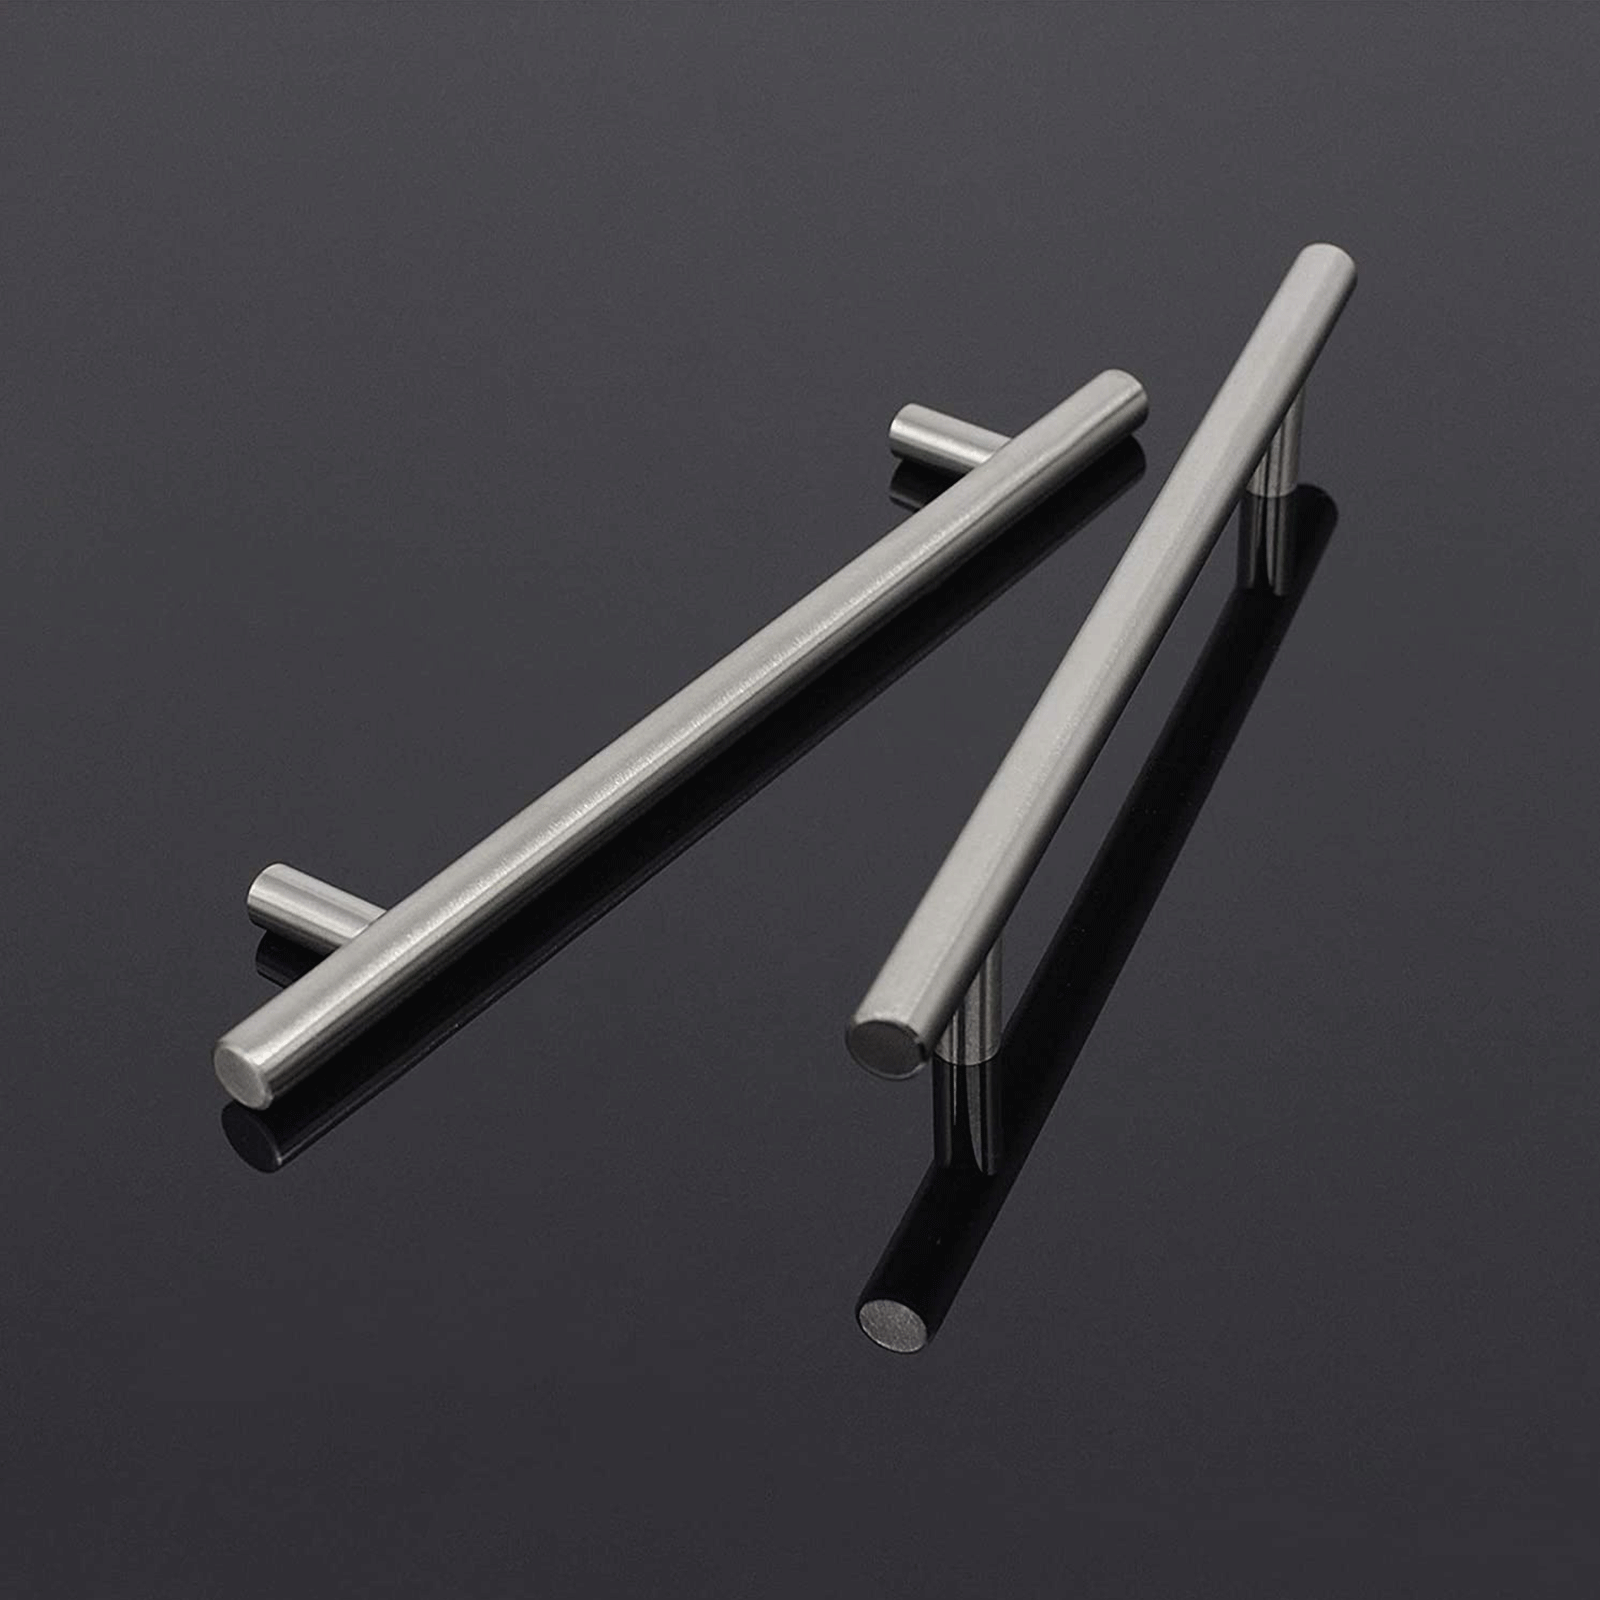 5Pack Euro T Bar Pulls for Cabinets, Brushed Stainless Steel Kitchen Handles 160mm 6 3/10inch PD201HSS160